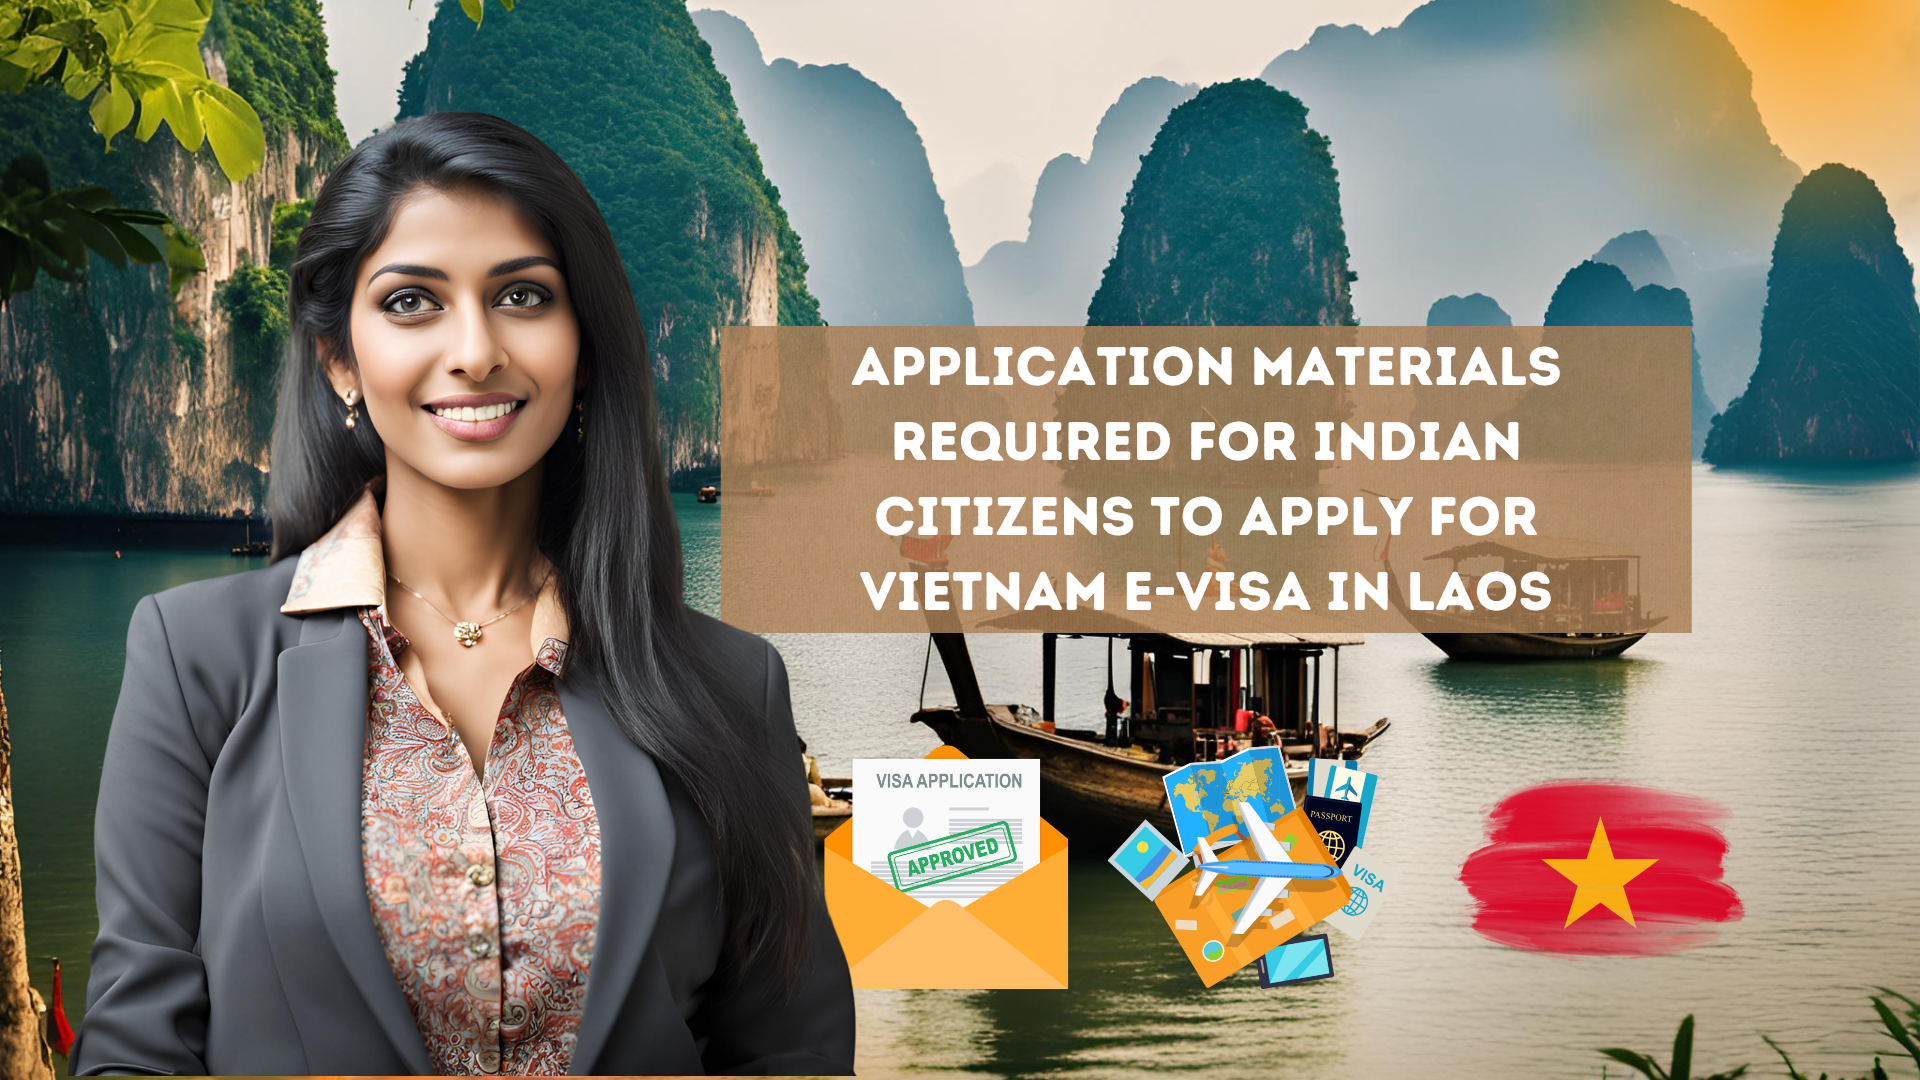 Application materials required for Indian citizens to apply for Vietnam e-visa in Laos